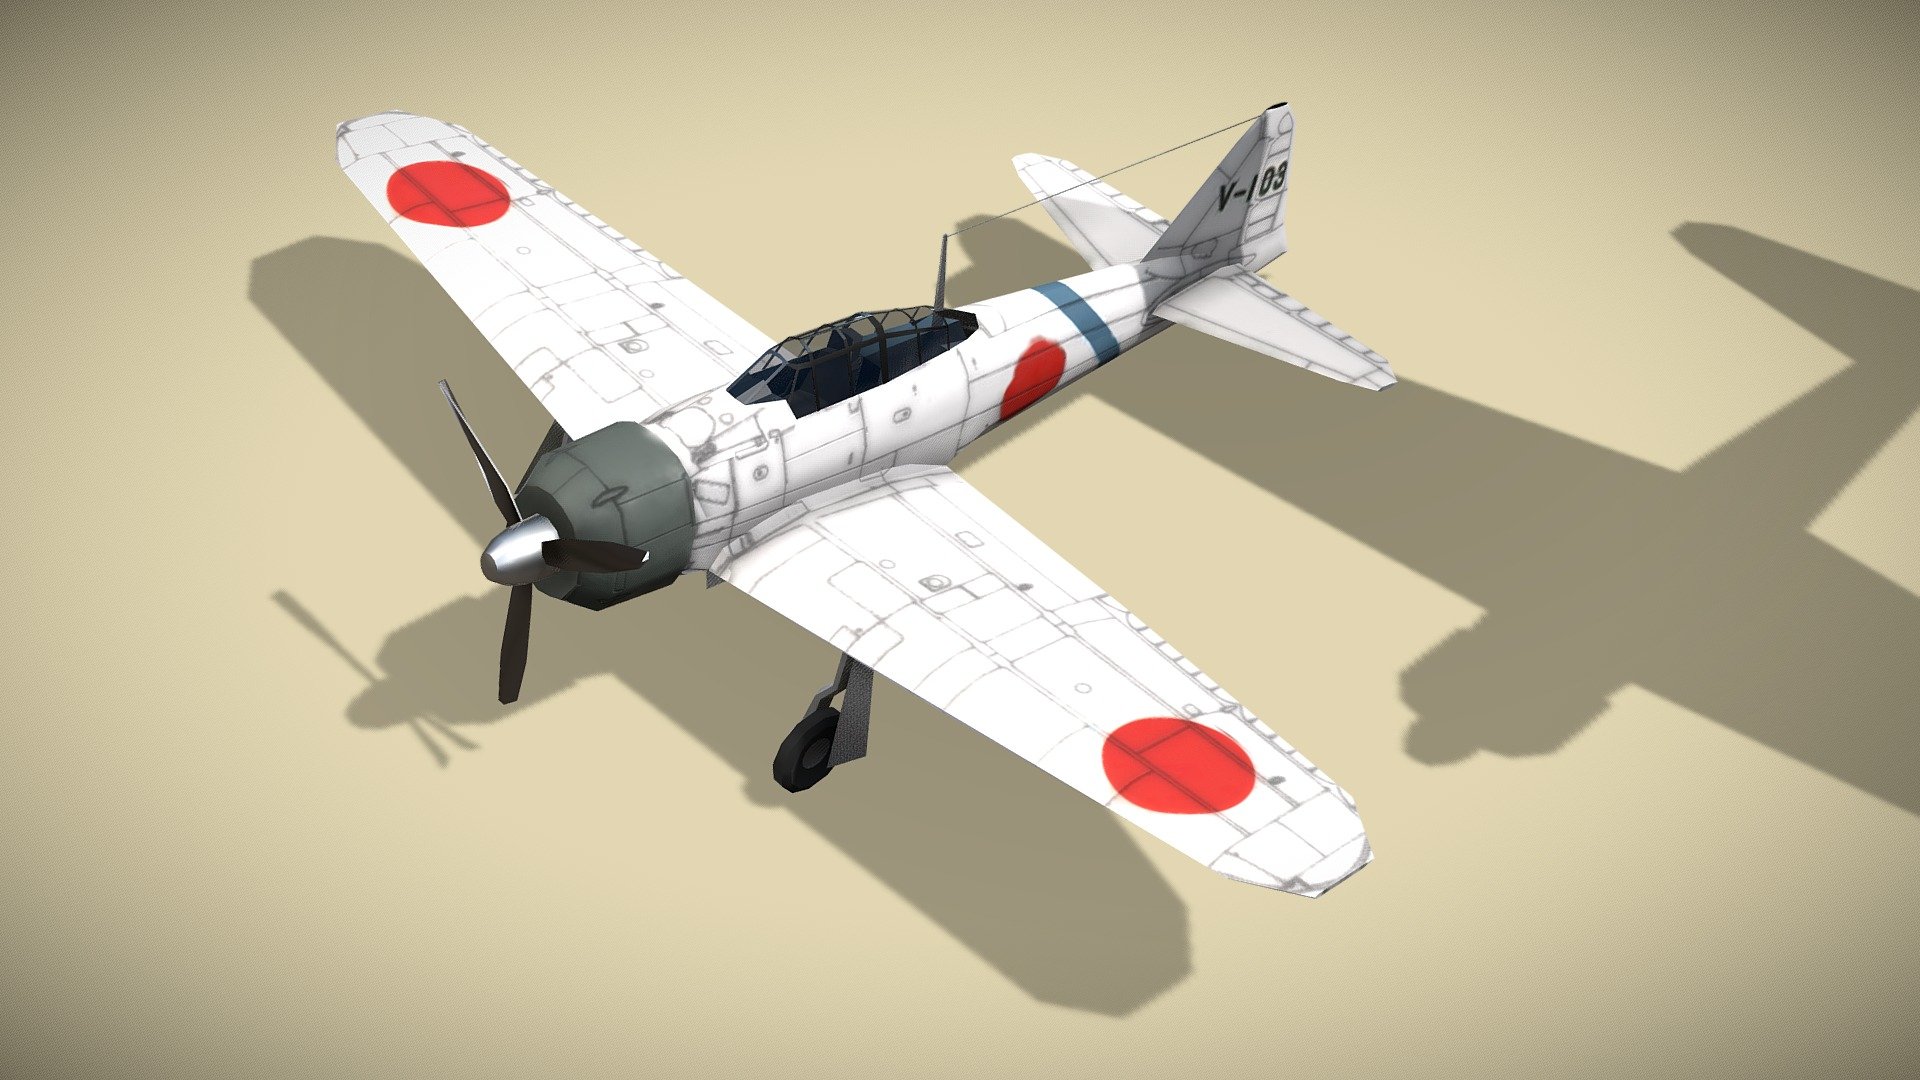 Mitsubishi A6M Zero

Lowpoly model of japanese fighter plane.



Mitsubishi A6M Zero is a long-range carrier-based fighter aircraft formerly manufactured by Mitsubishi Aircraft Company and was operated by the Imperial Japanese Navy from 1940 to 1945. The A6M was designated as the Mitsubishi Navy Type 0 carrier fighter. The A6M was usually referred to by its pilots as the Reisen, &ldquo;0